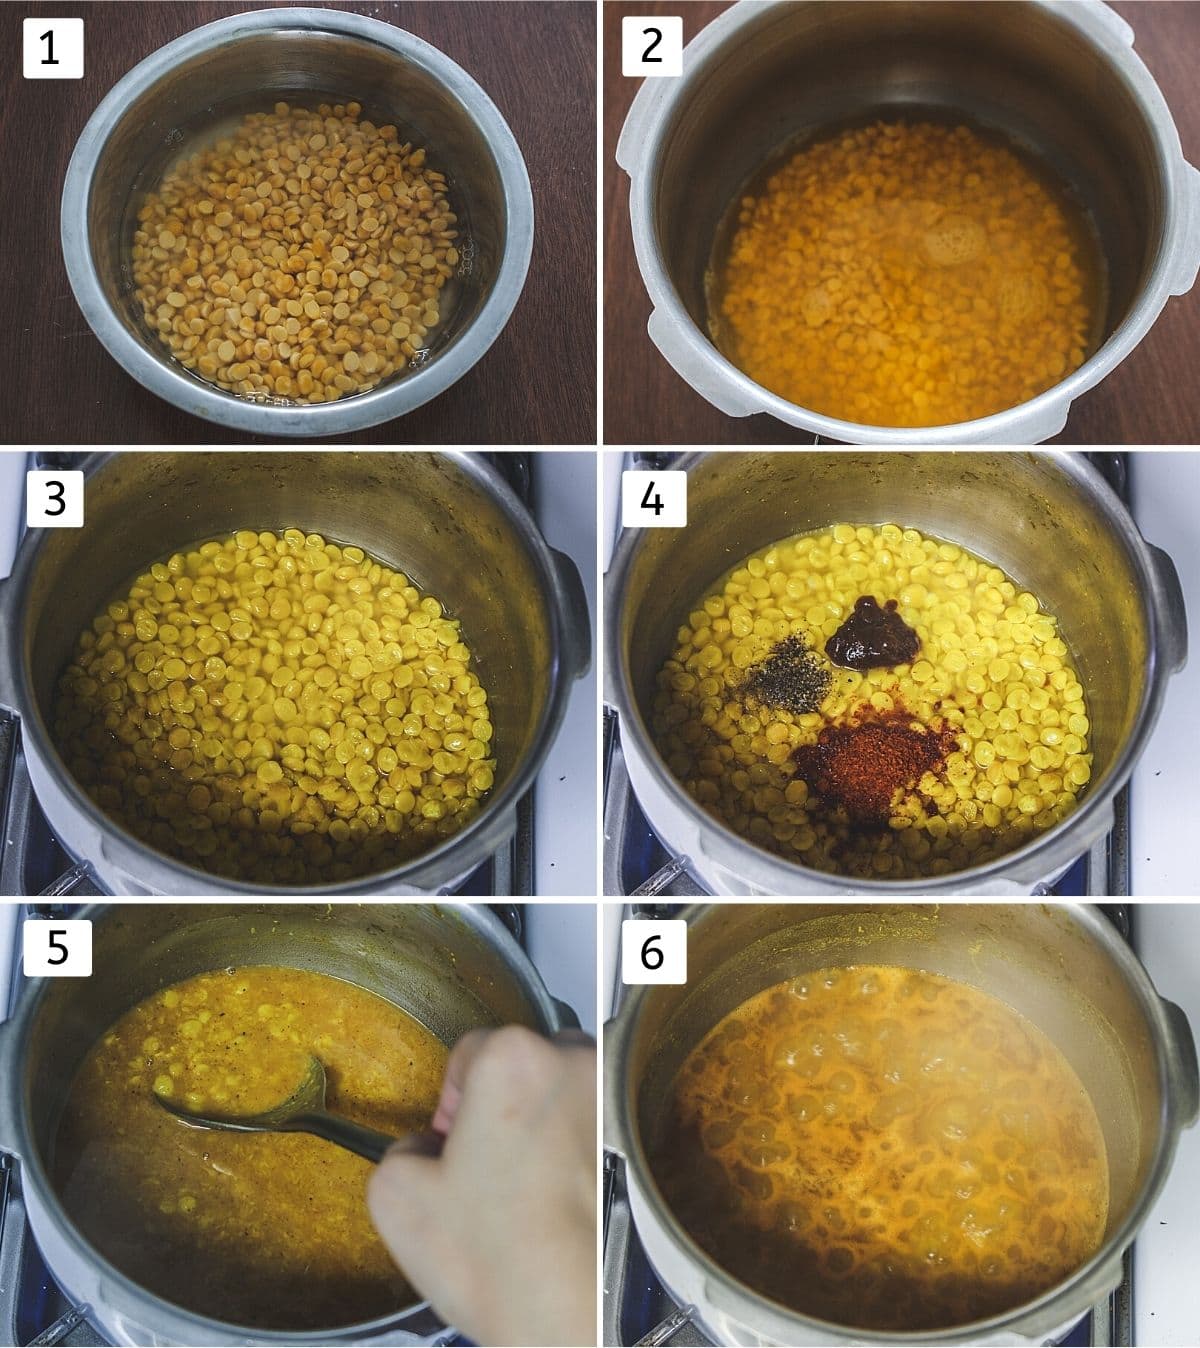 Collage of 6 images showing soaking, boiling dal, adding spices and simmering.